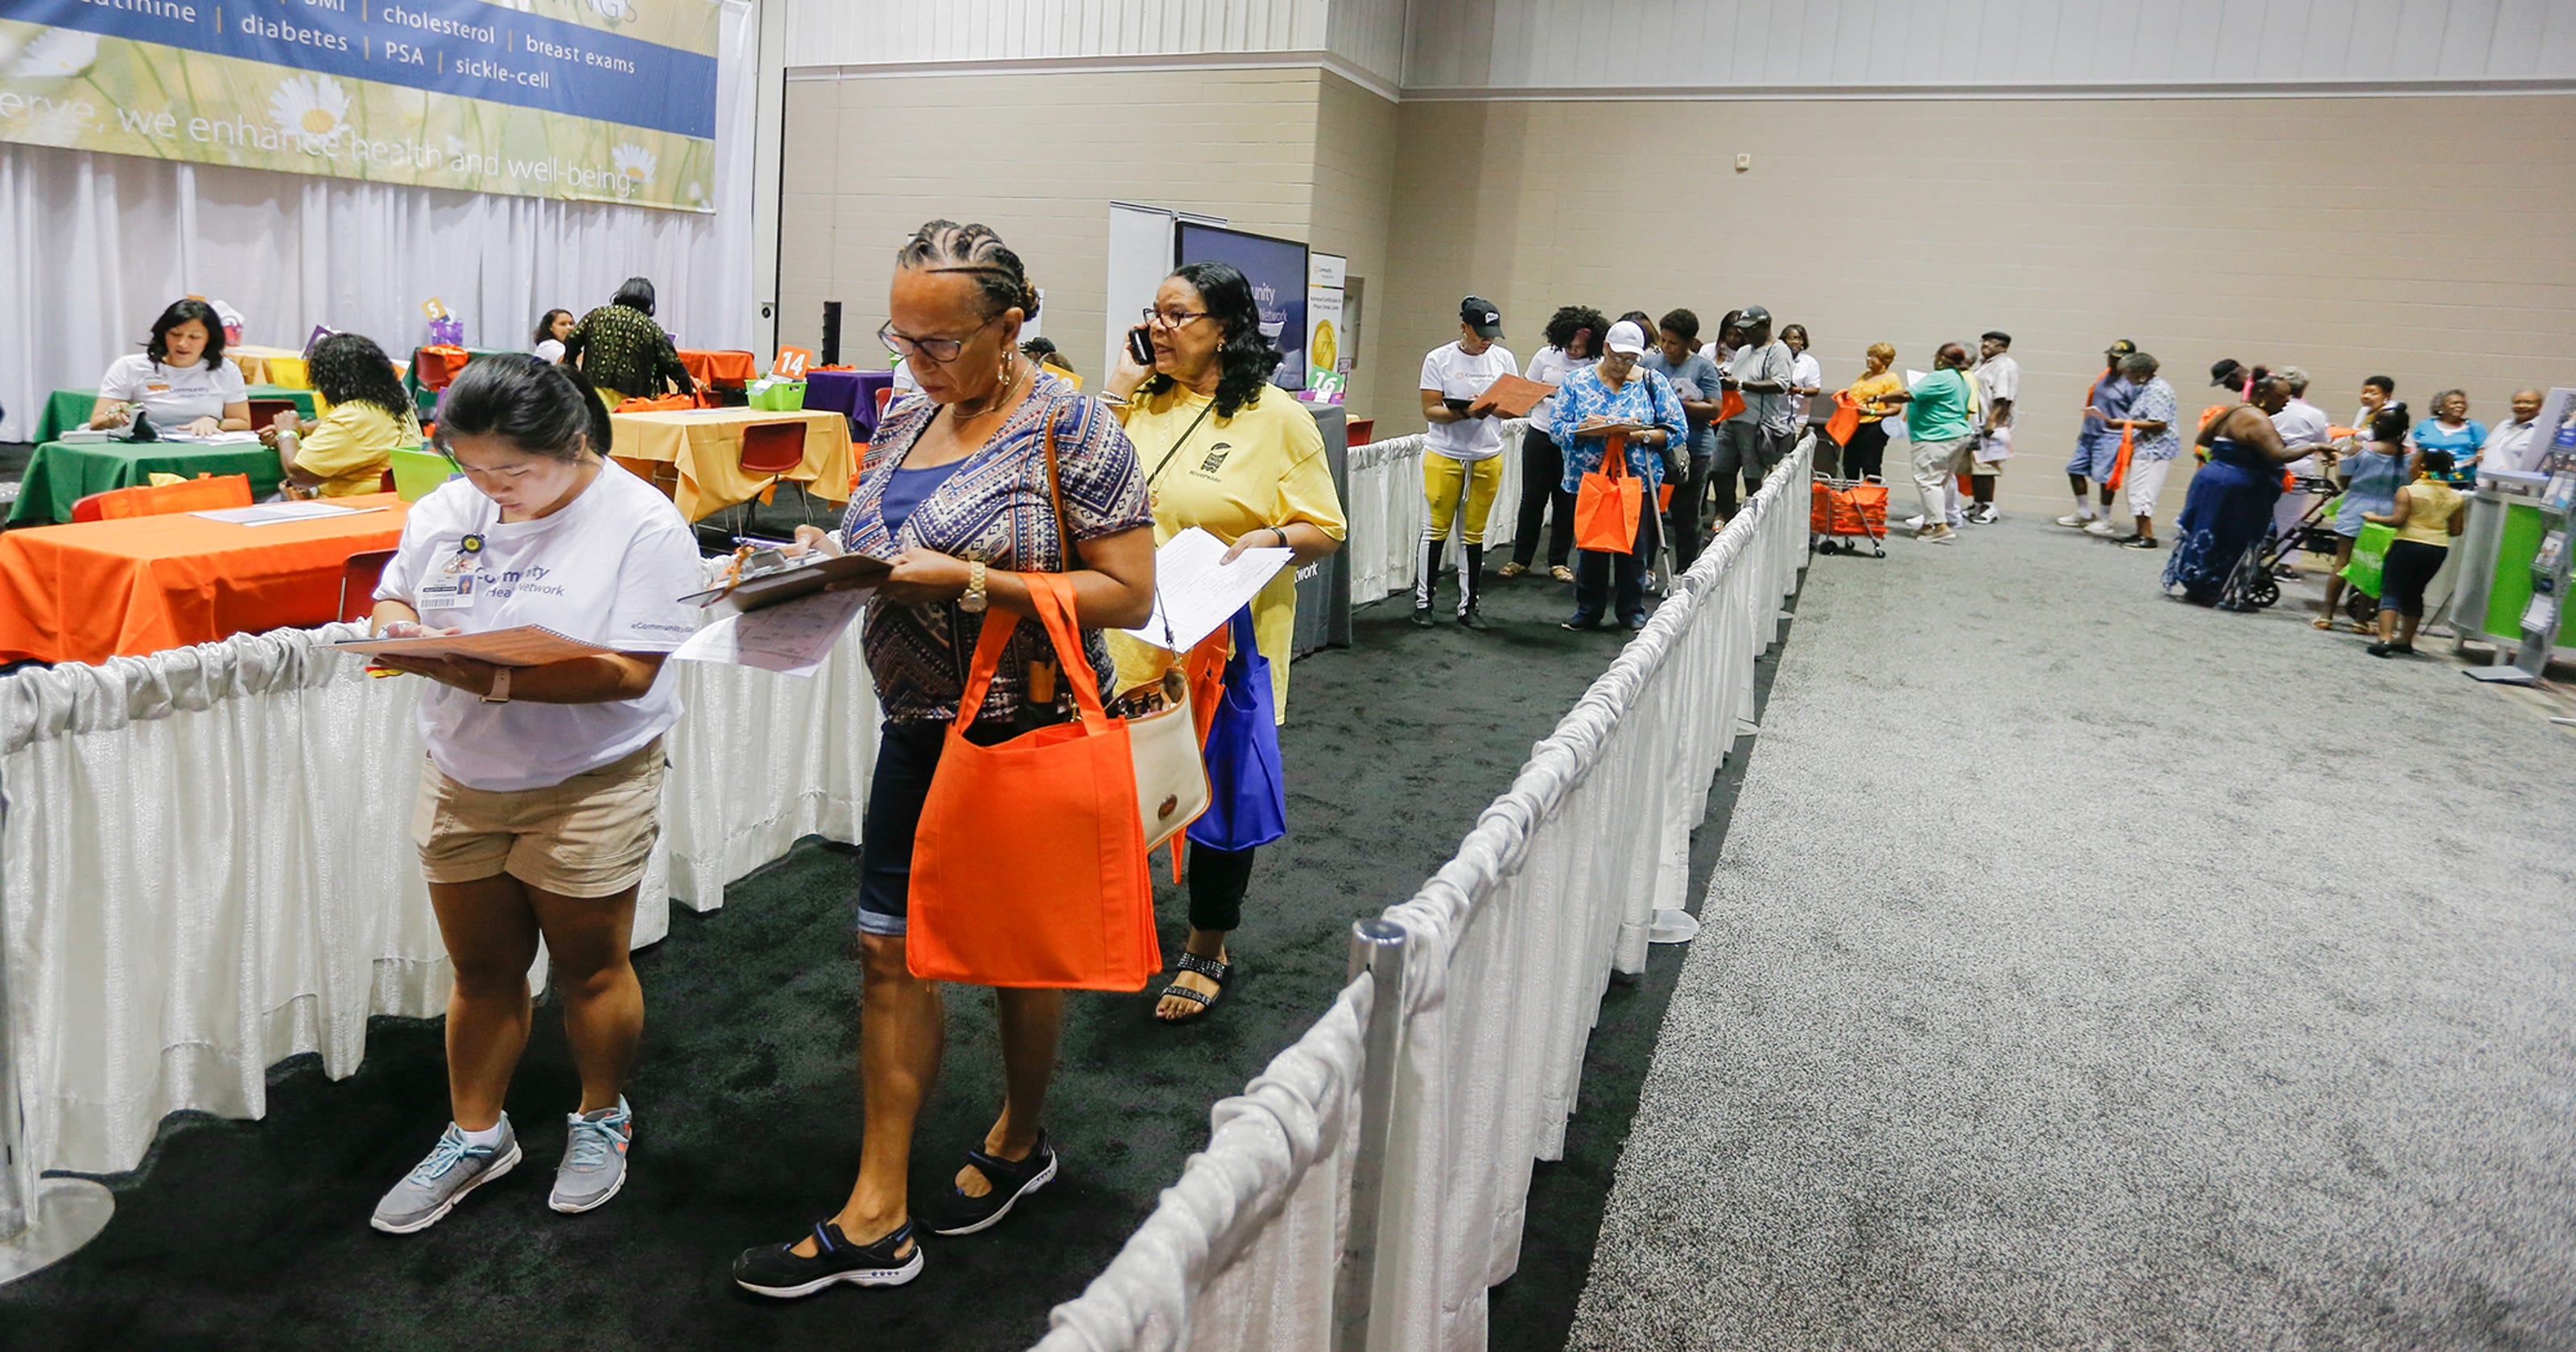 Black Expo's health fair offers free vaccinations, testing all weekend